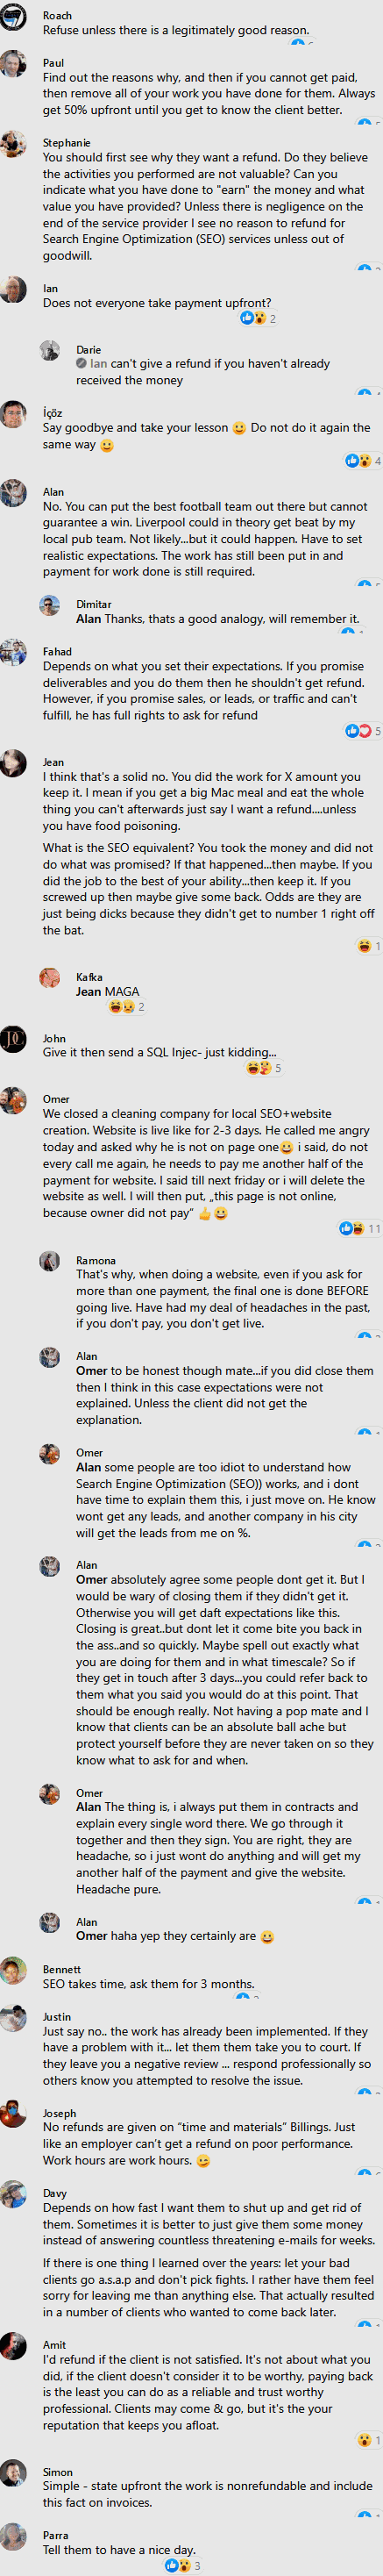 what should you do if a seo client asks for a refund after you did the work